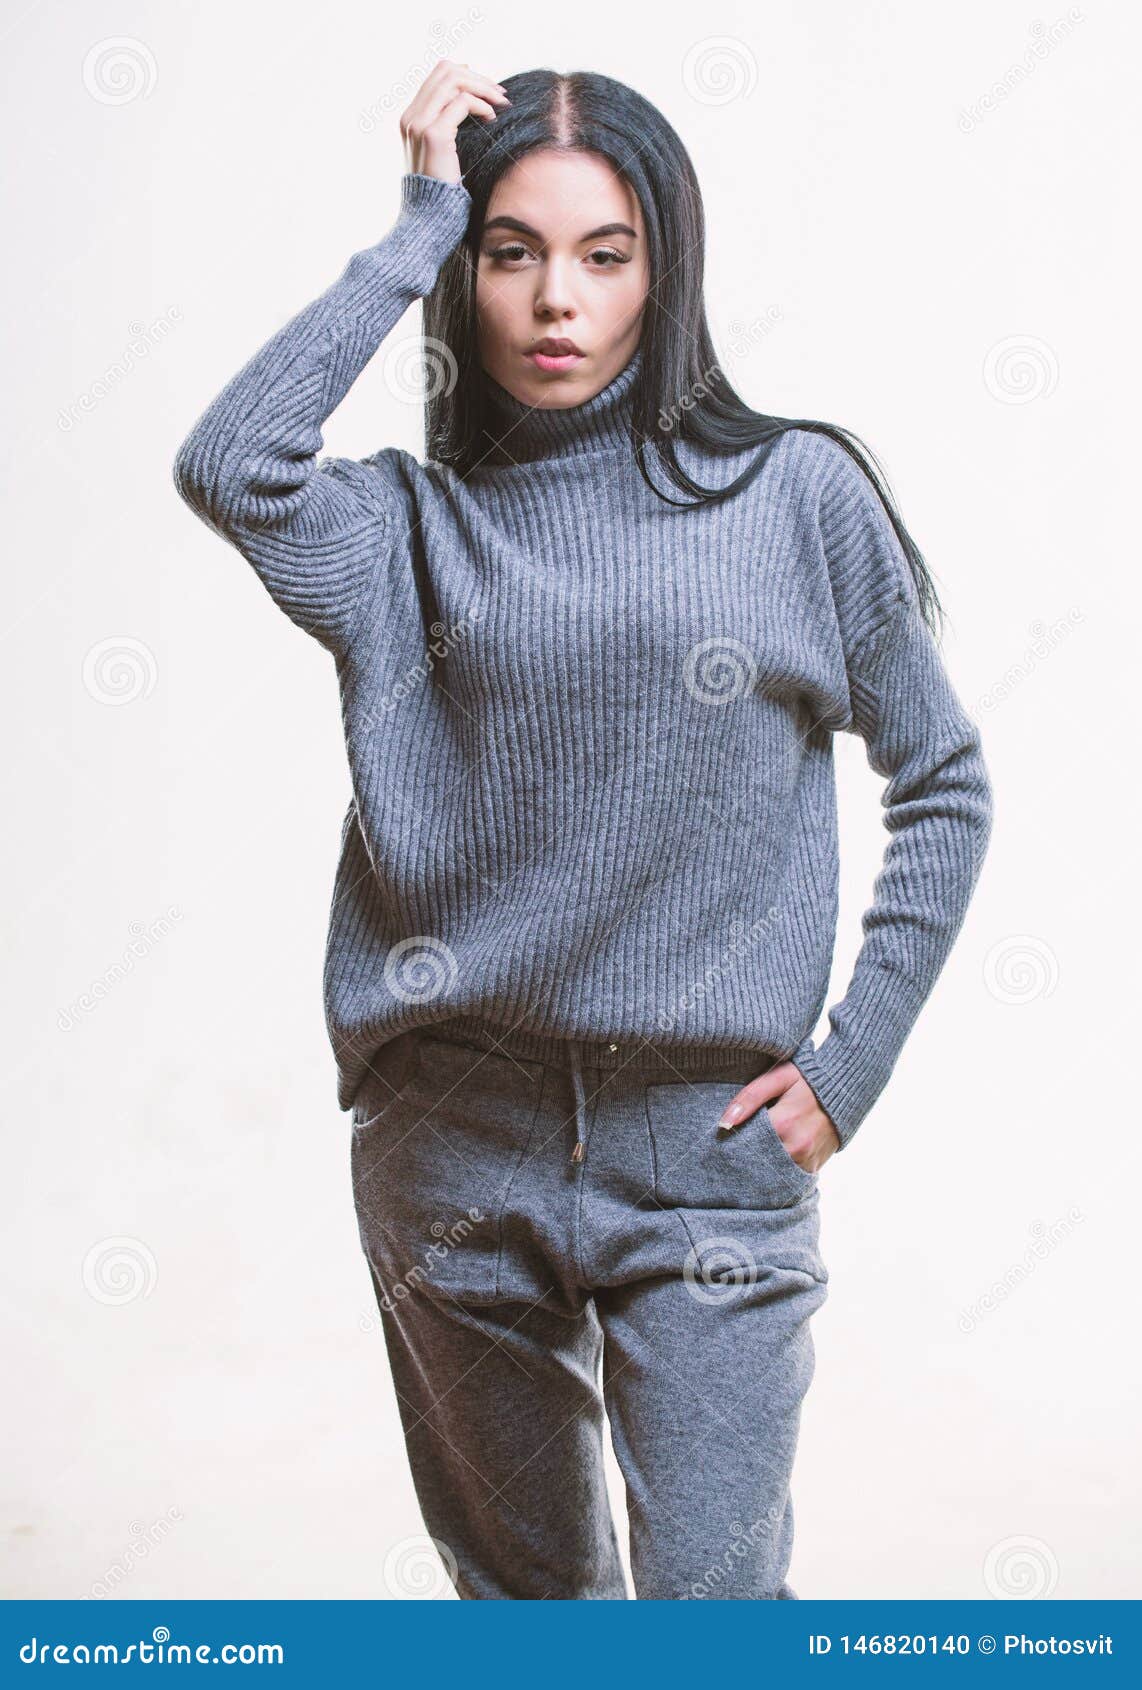 Knitwear Concept. Feel Warm and Comfortable. Woman Wear Grey Textile ...